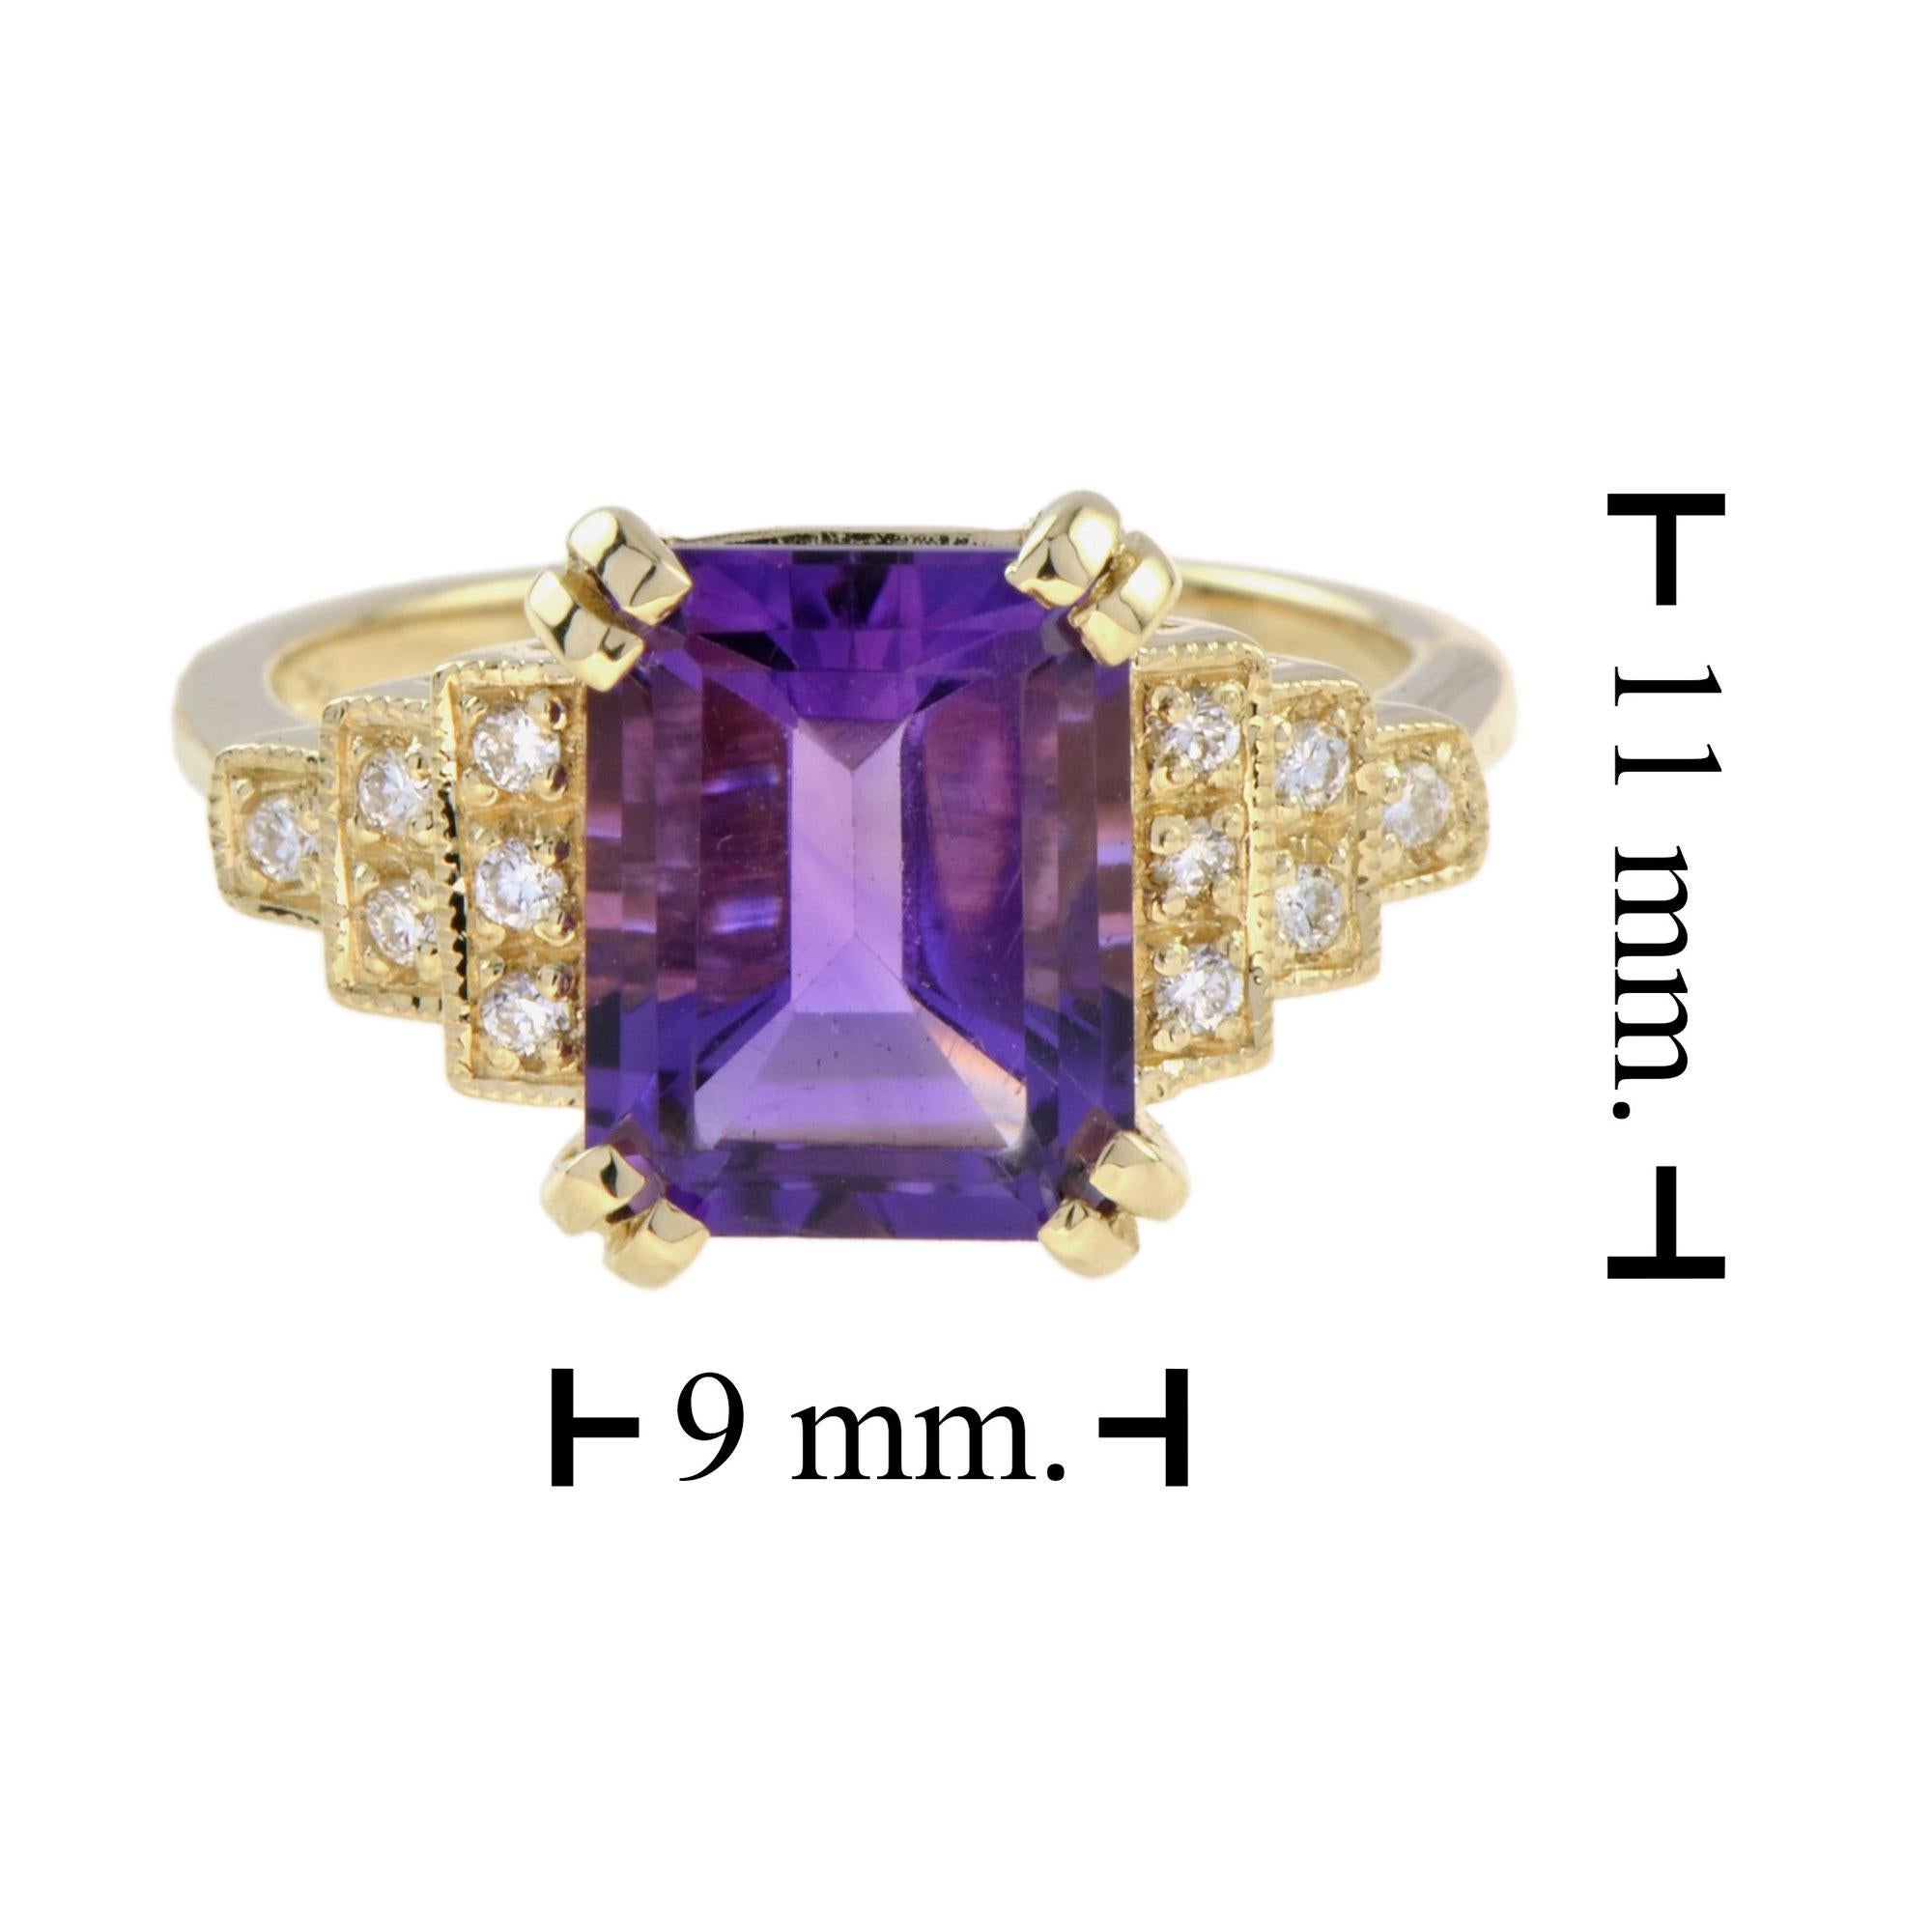 For Sale:  Emerald Cut Amethyst and Diamond Step Shoulder Engagement Ring in 14K Gold 7